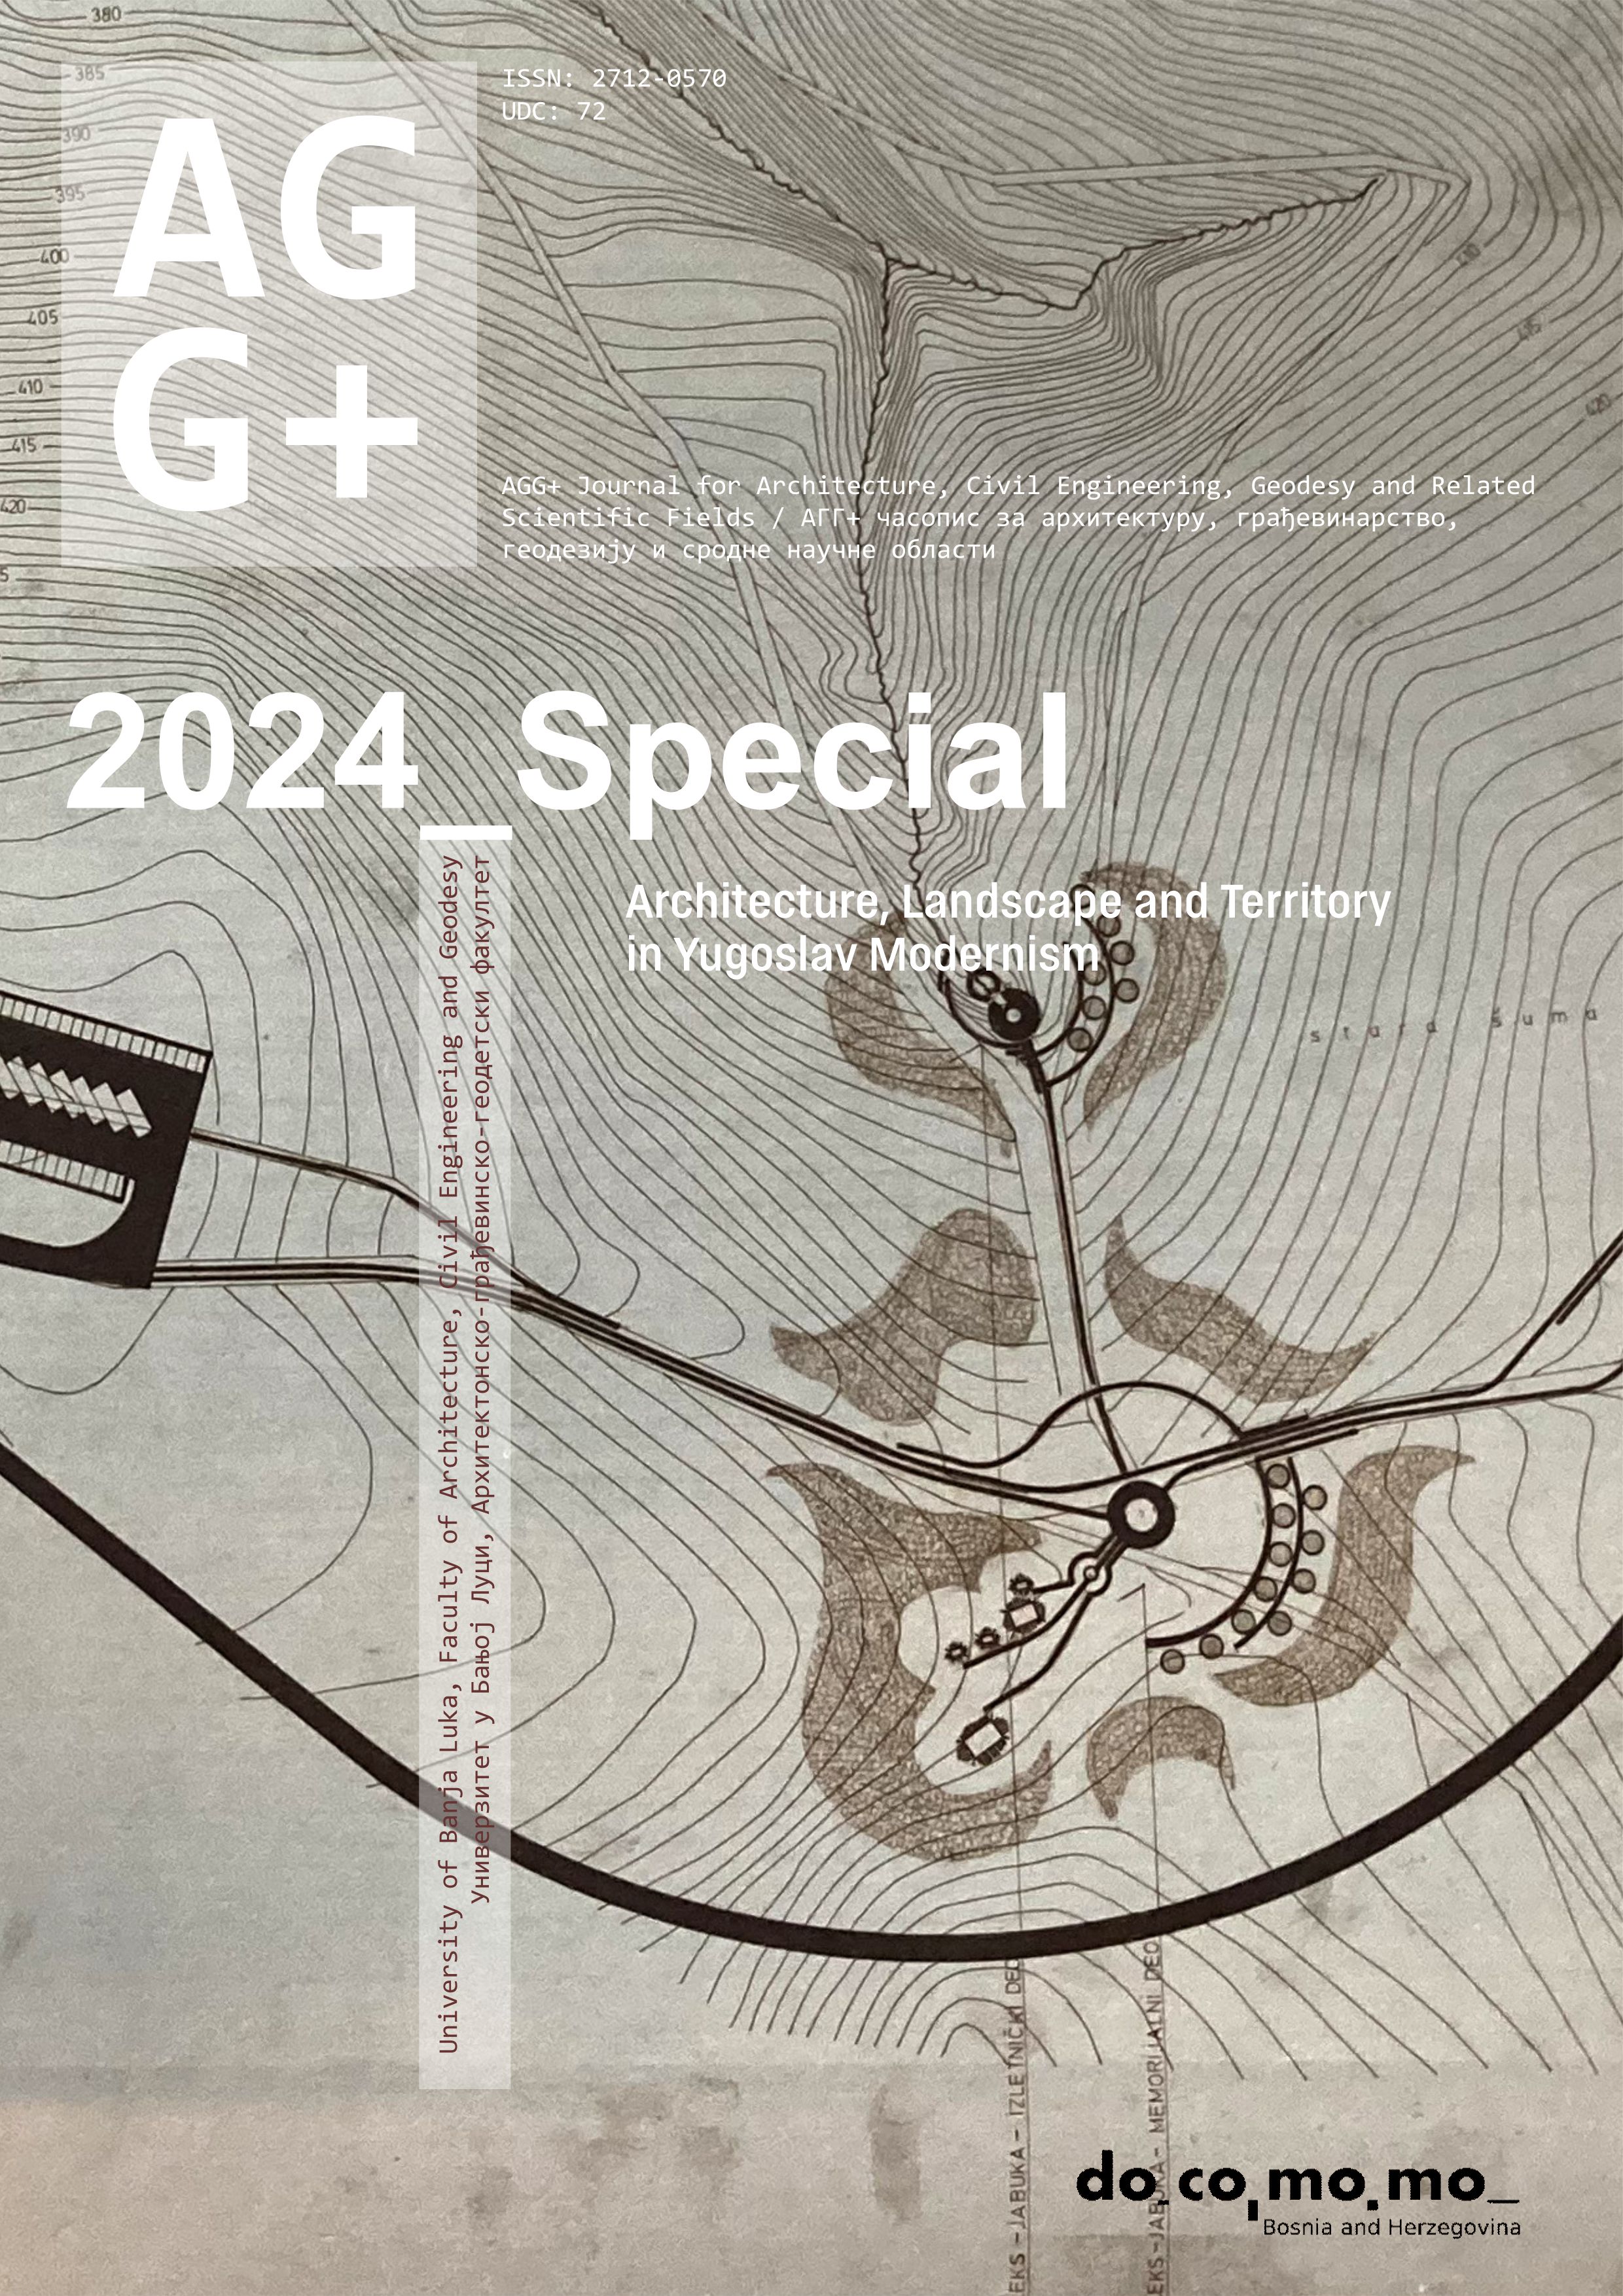 AGG+ Journal for Architecture, Civil Engineering, Geodesy, and Related Scientific Fields